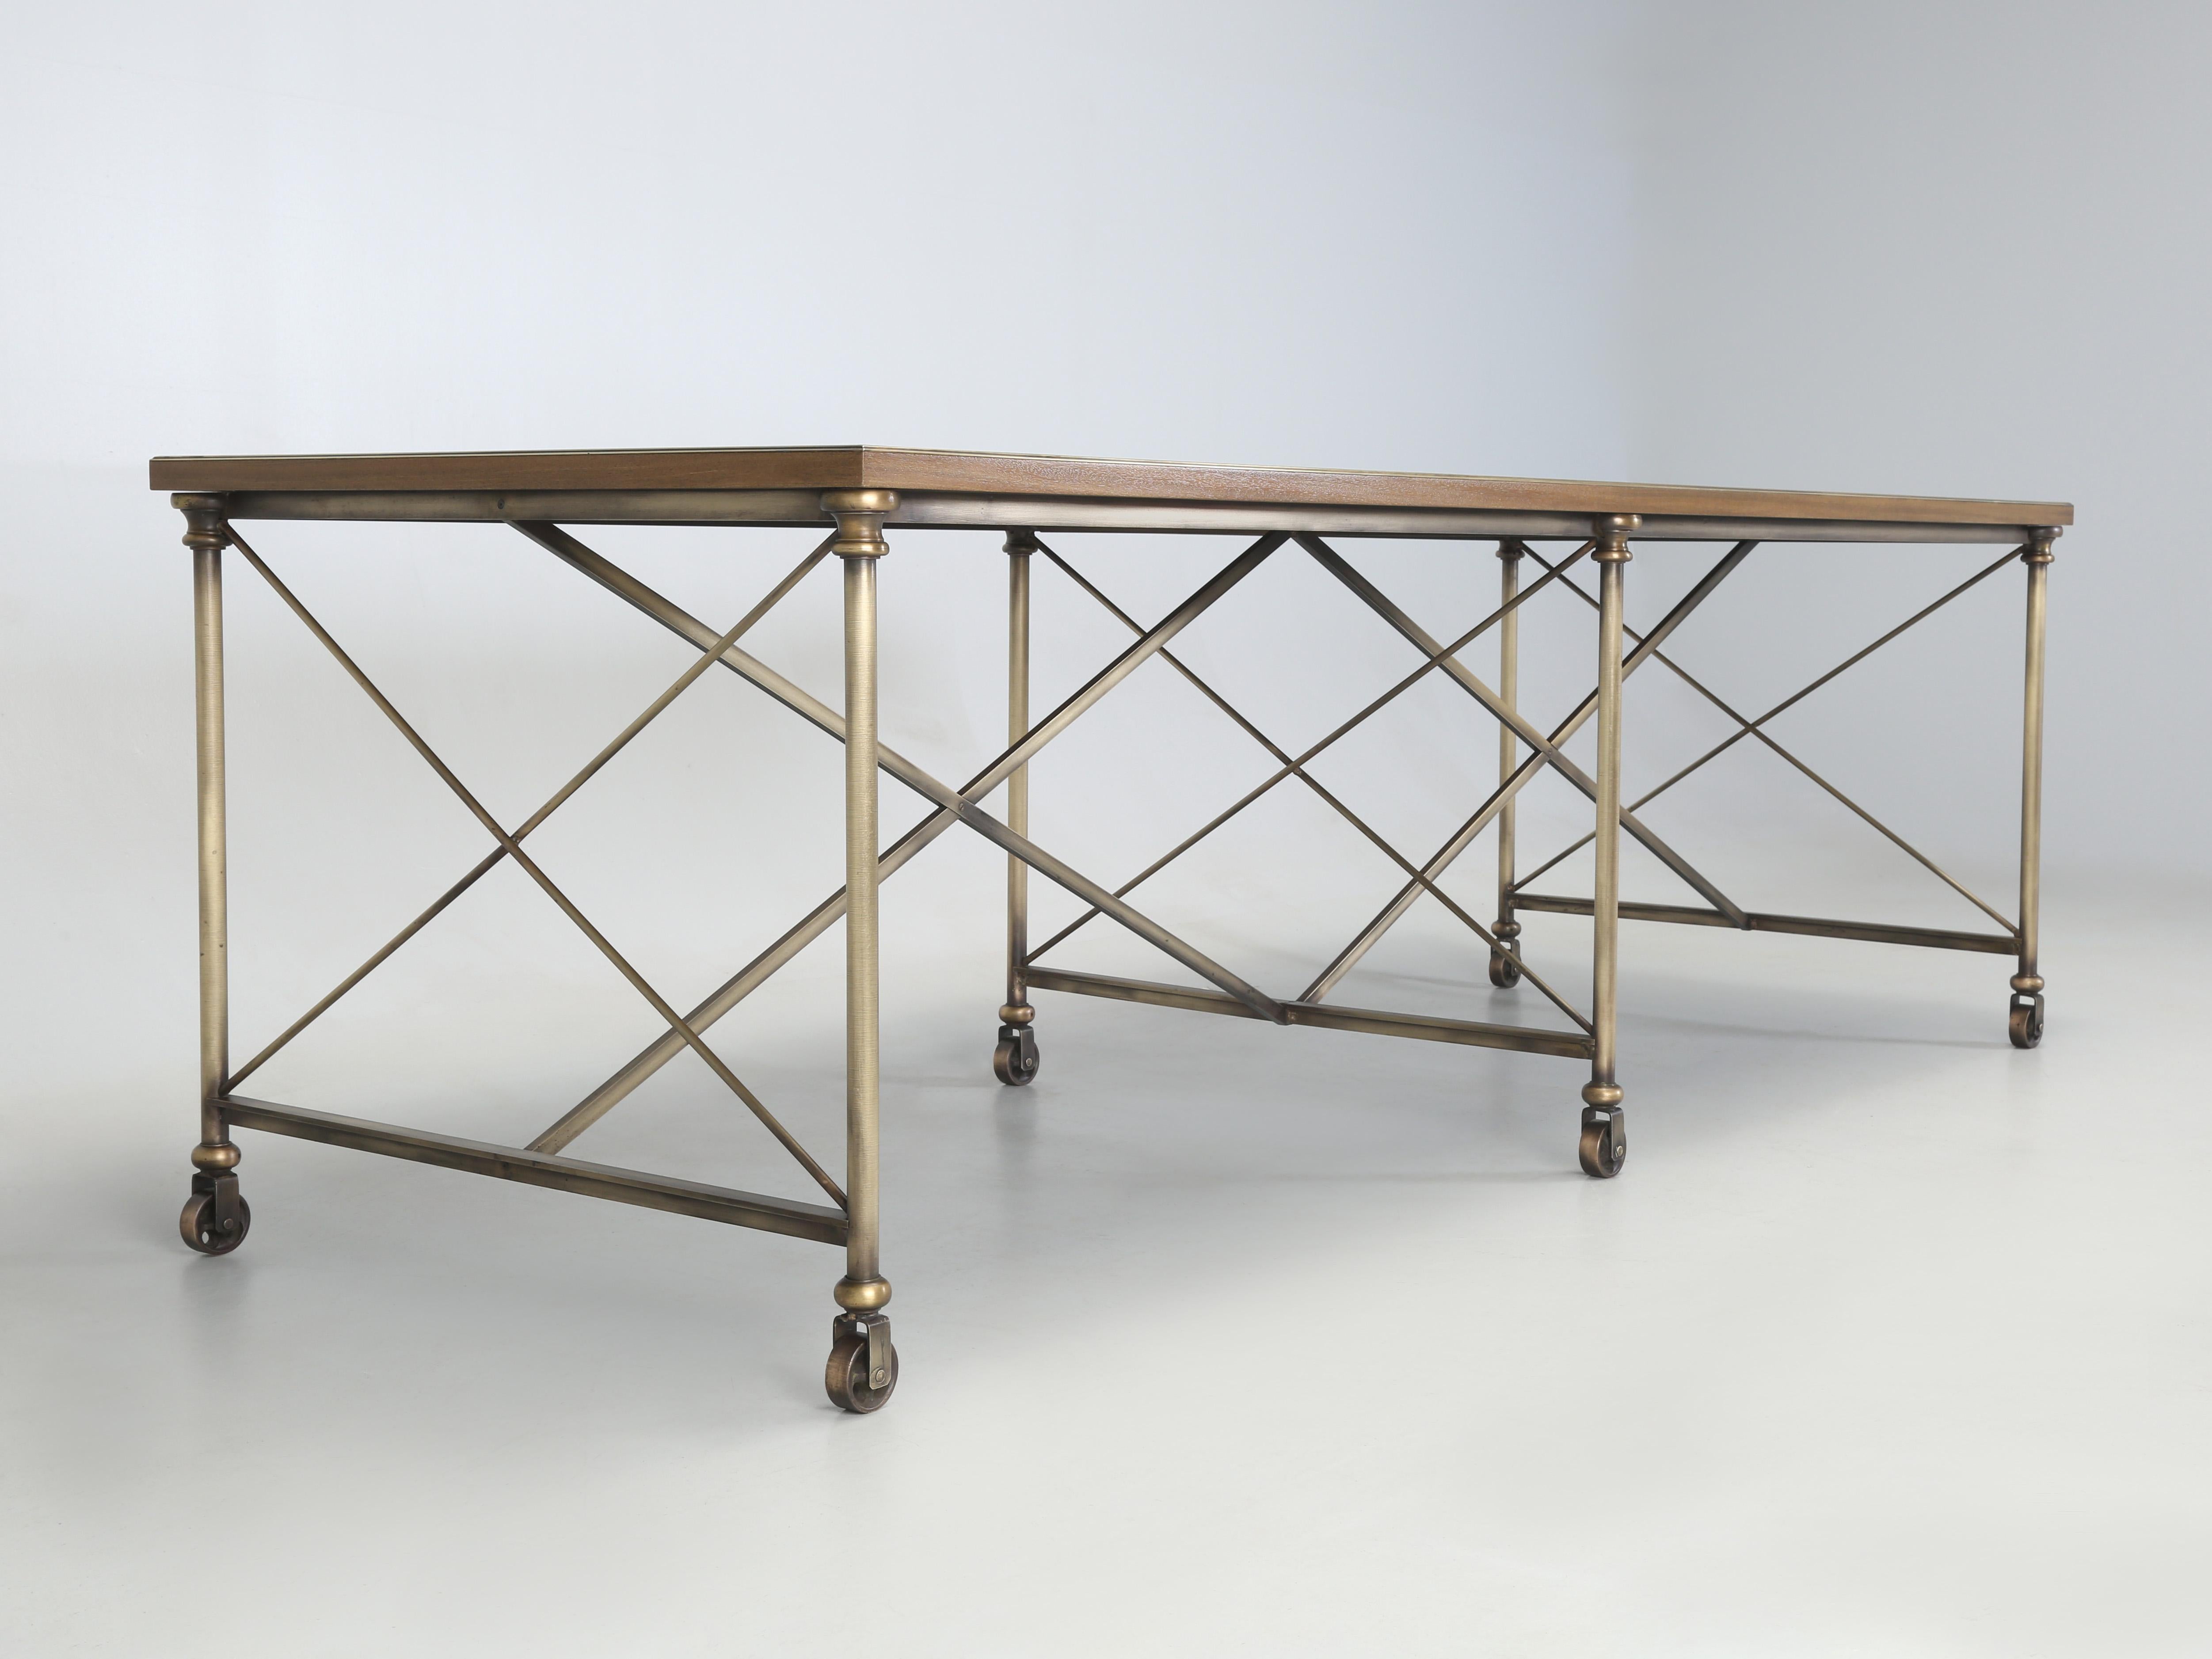 The Old Plank Exclusive Dining Table was fabricated from solid Bronze, imported French brass trim, walnut and mahogany. This exquisite French Industrial Inspired Dining Table is in stock for immediate delivery, or we can construct a similar custom